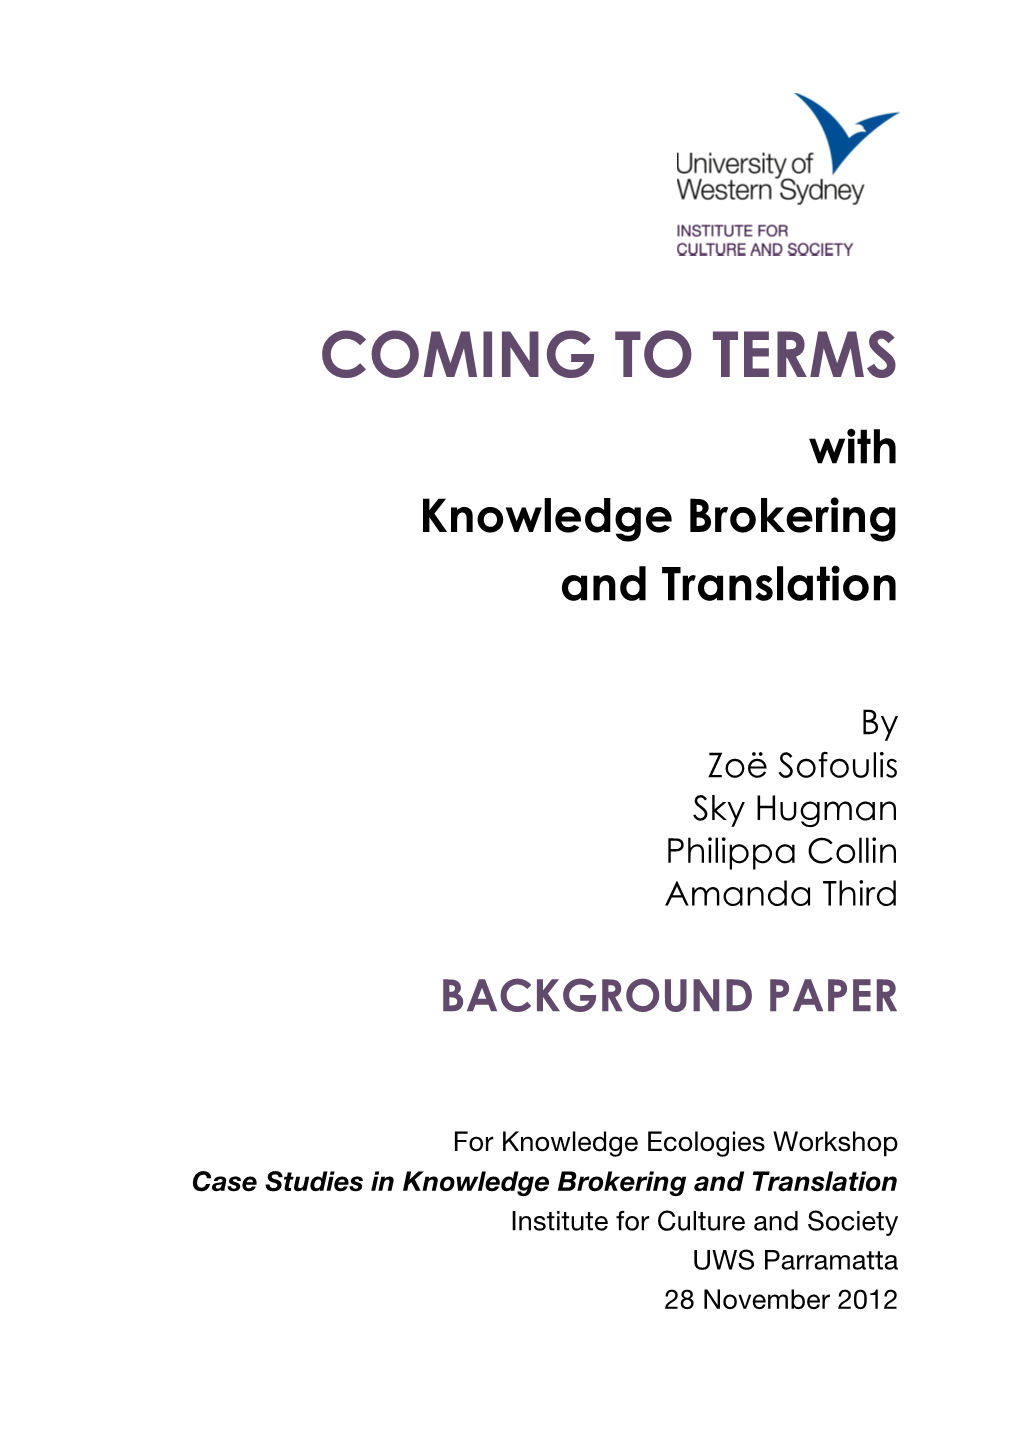 COMING to TERMS with Knowledge Brokering and Translation